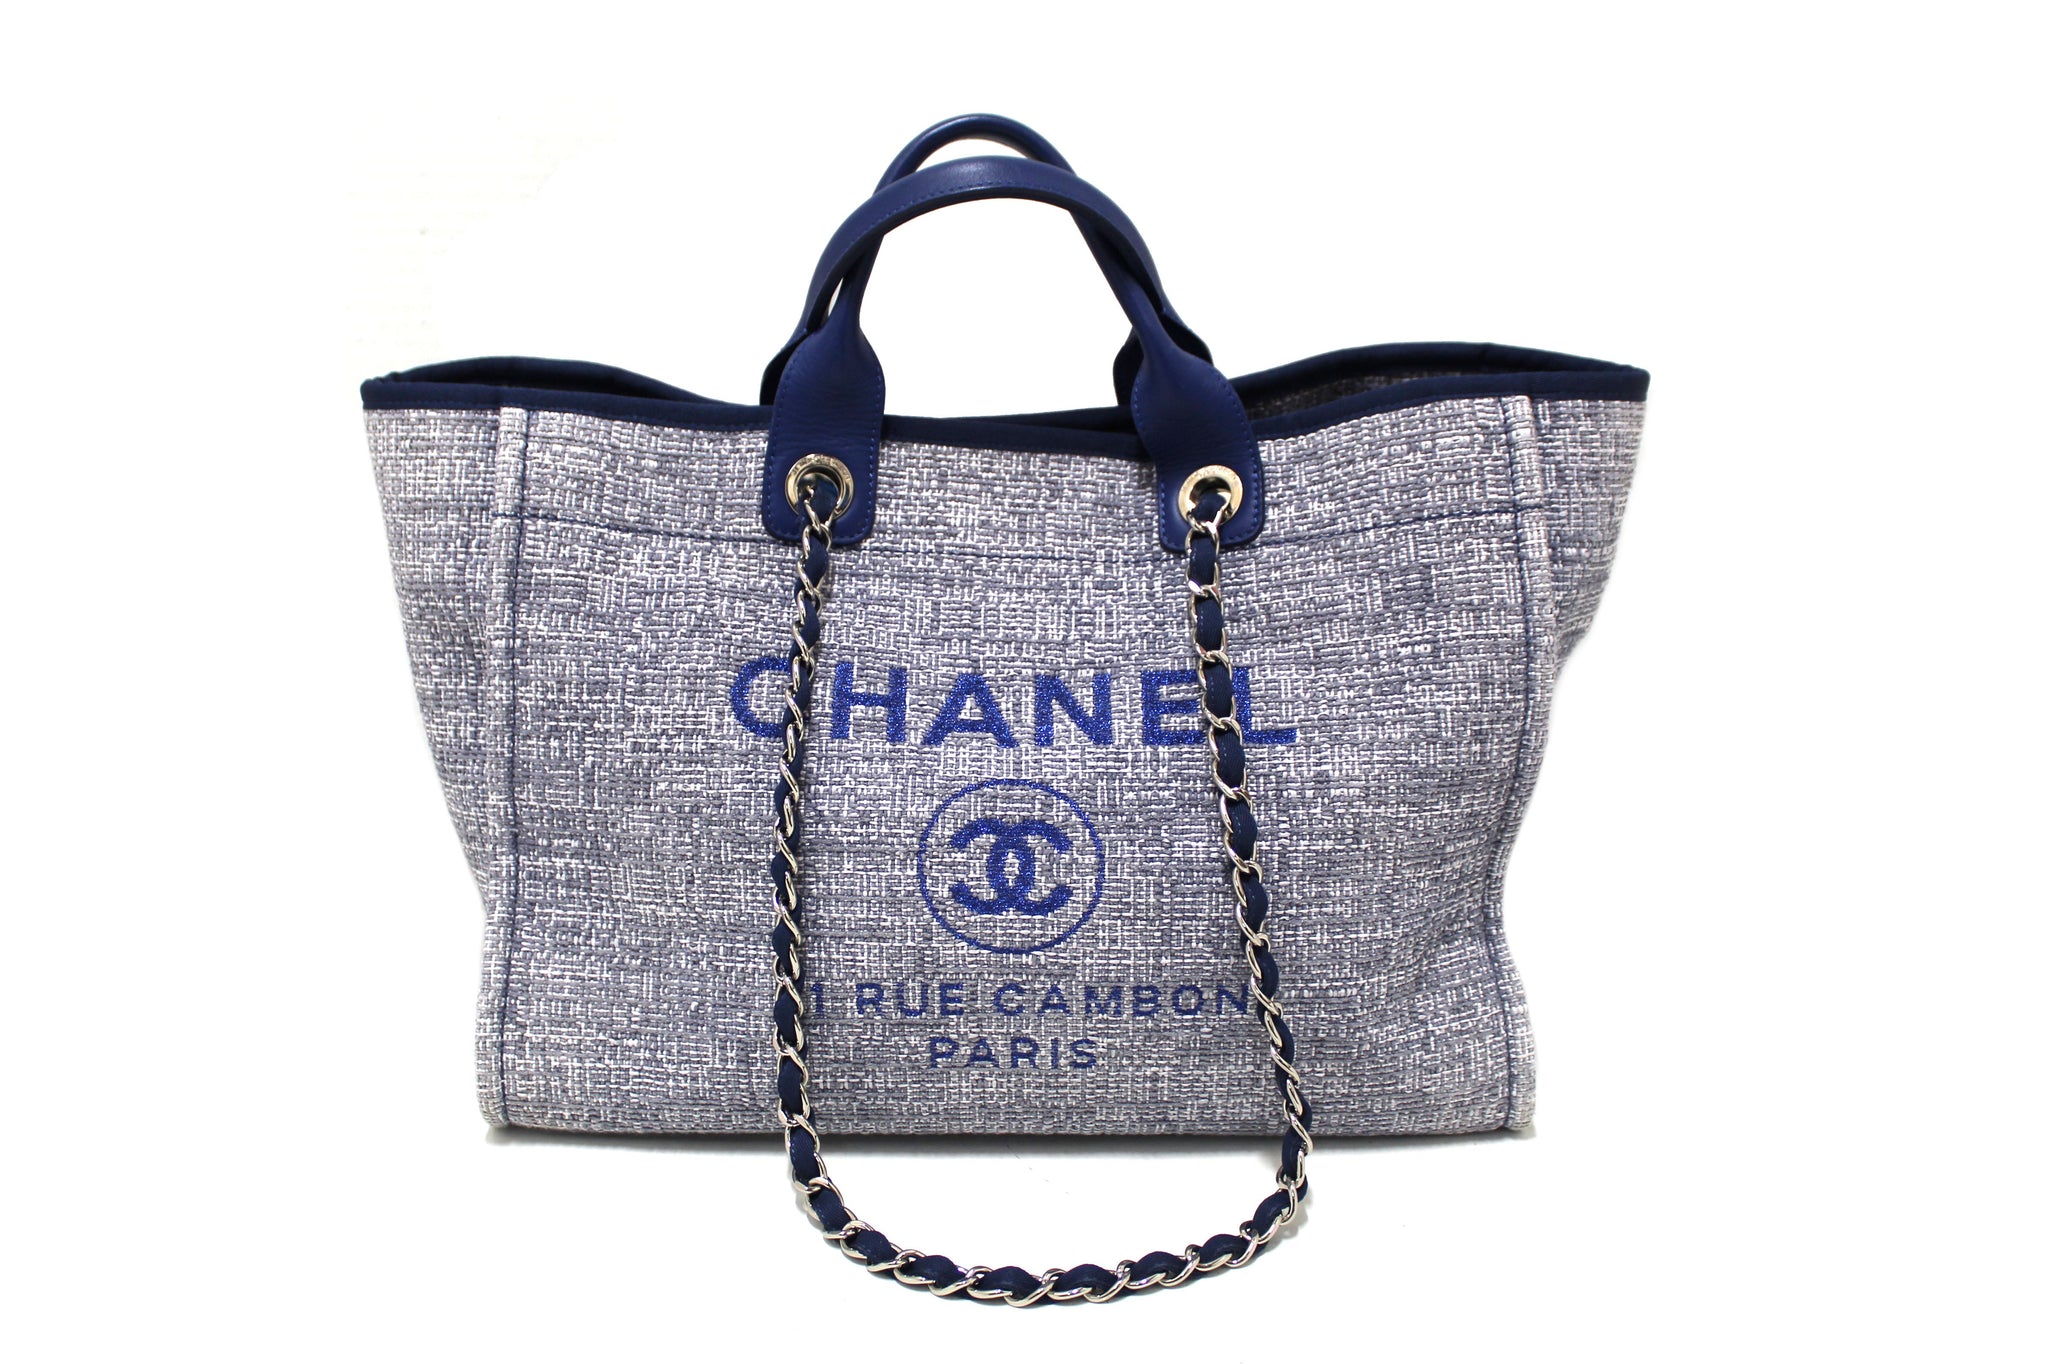 Chanel Blue Tweed Maxi Deauville Shopping Tote – Italy Station